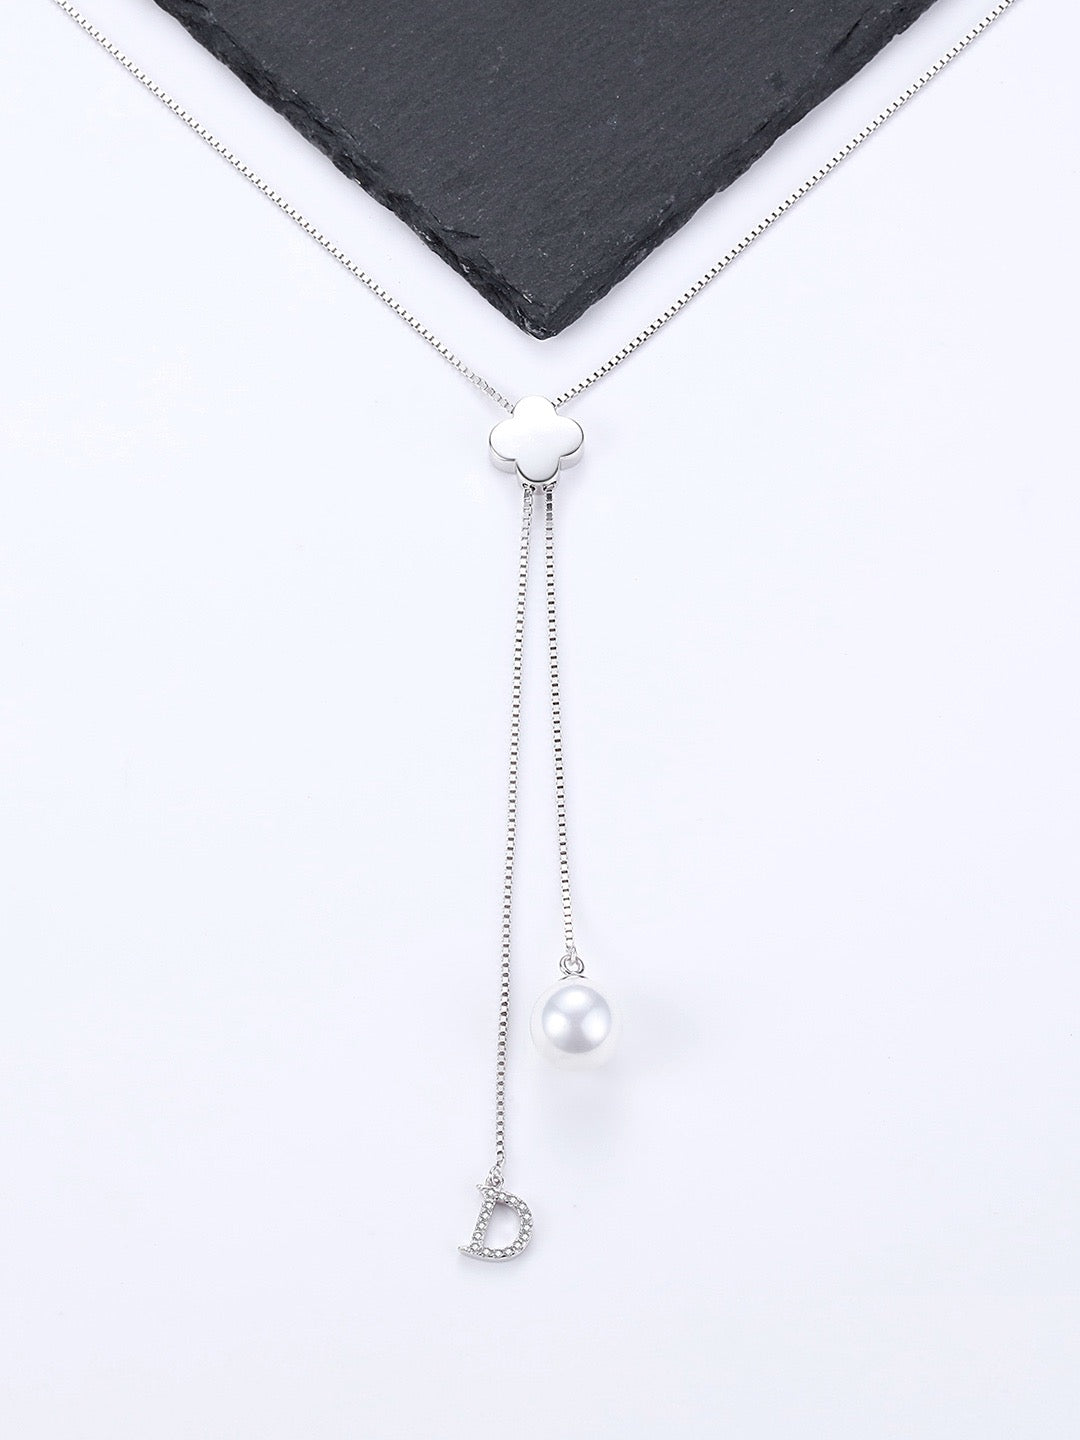 Long-length sweater necklace